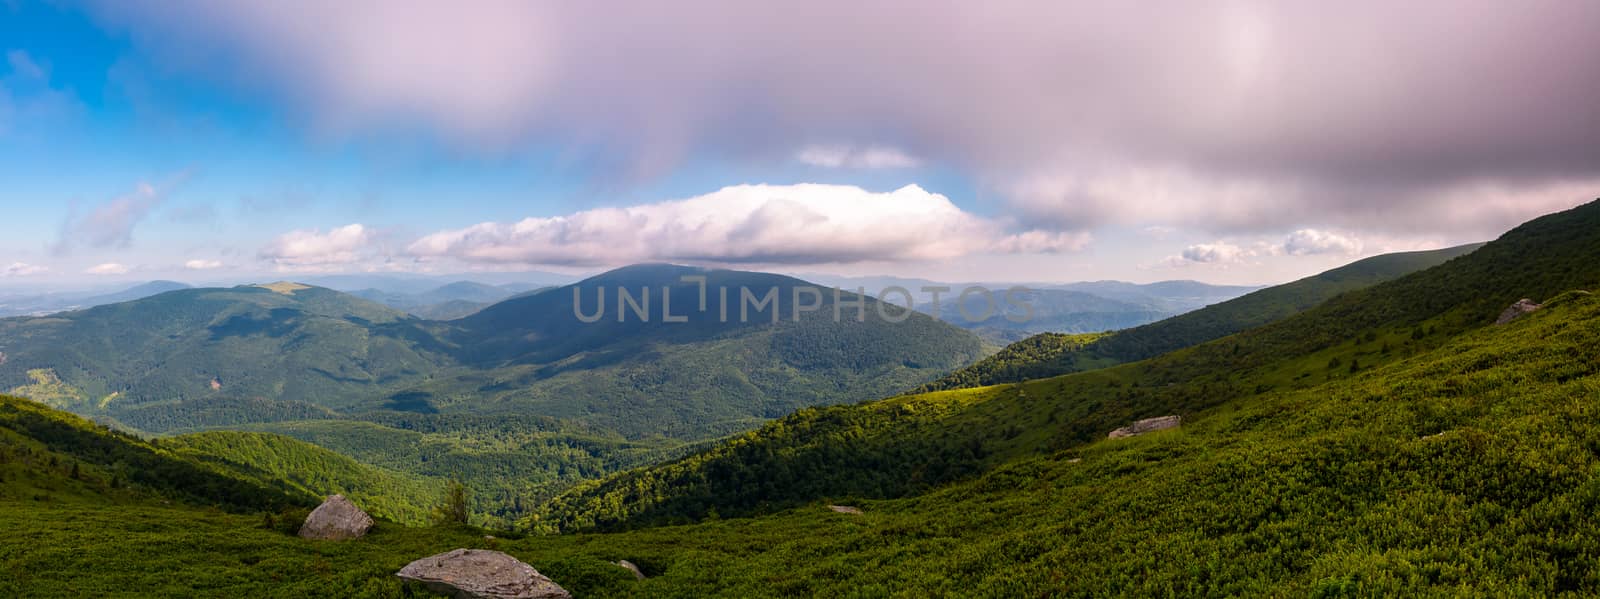 panorama of beautiful mountain landscape. beautiful scenery with clouds coming over the hills